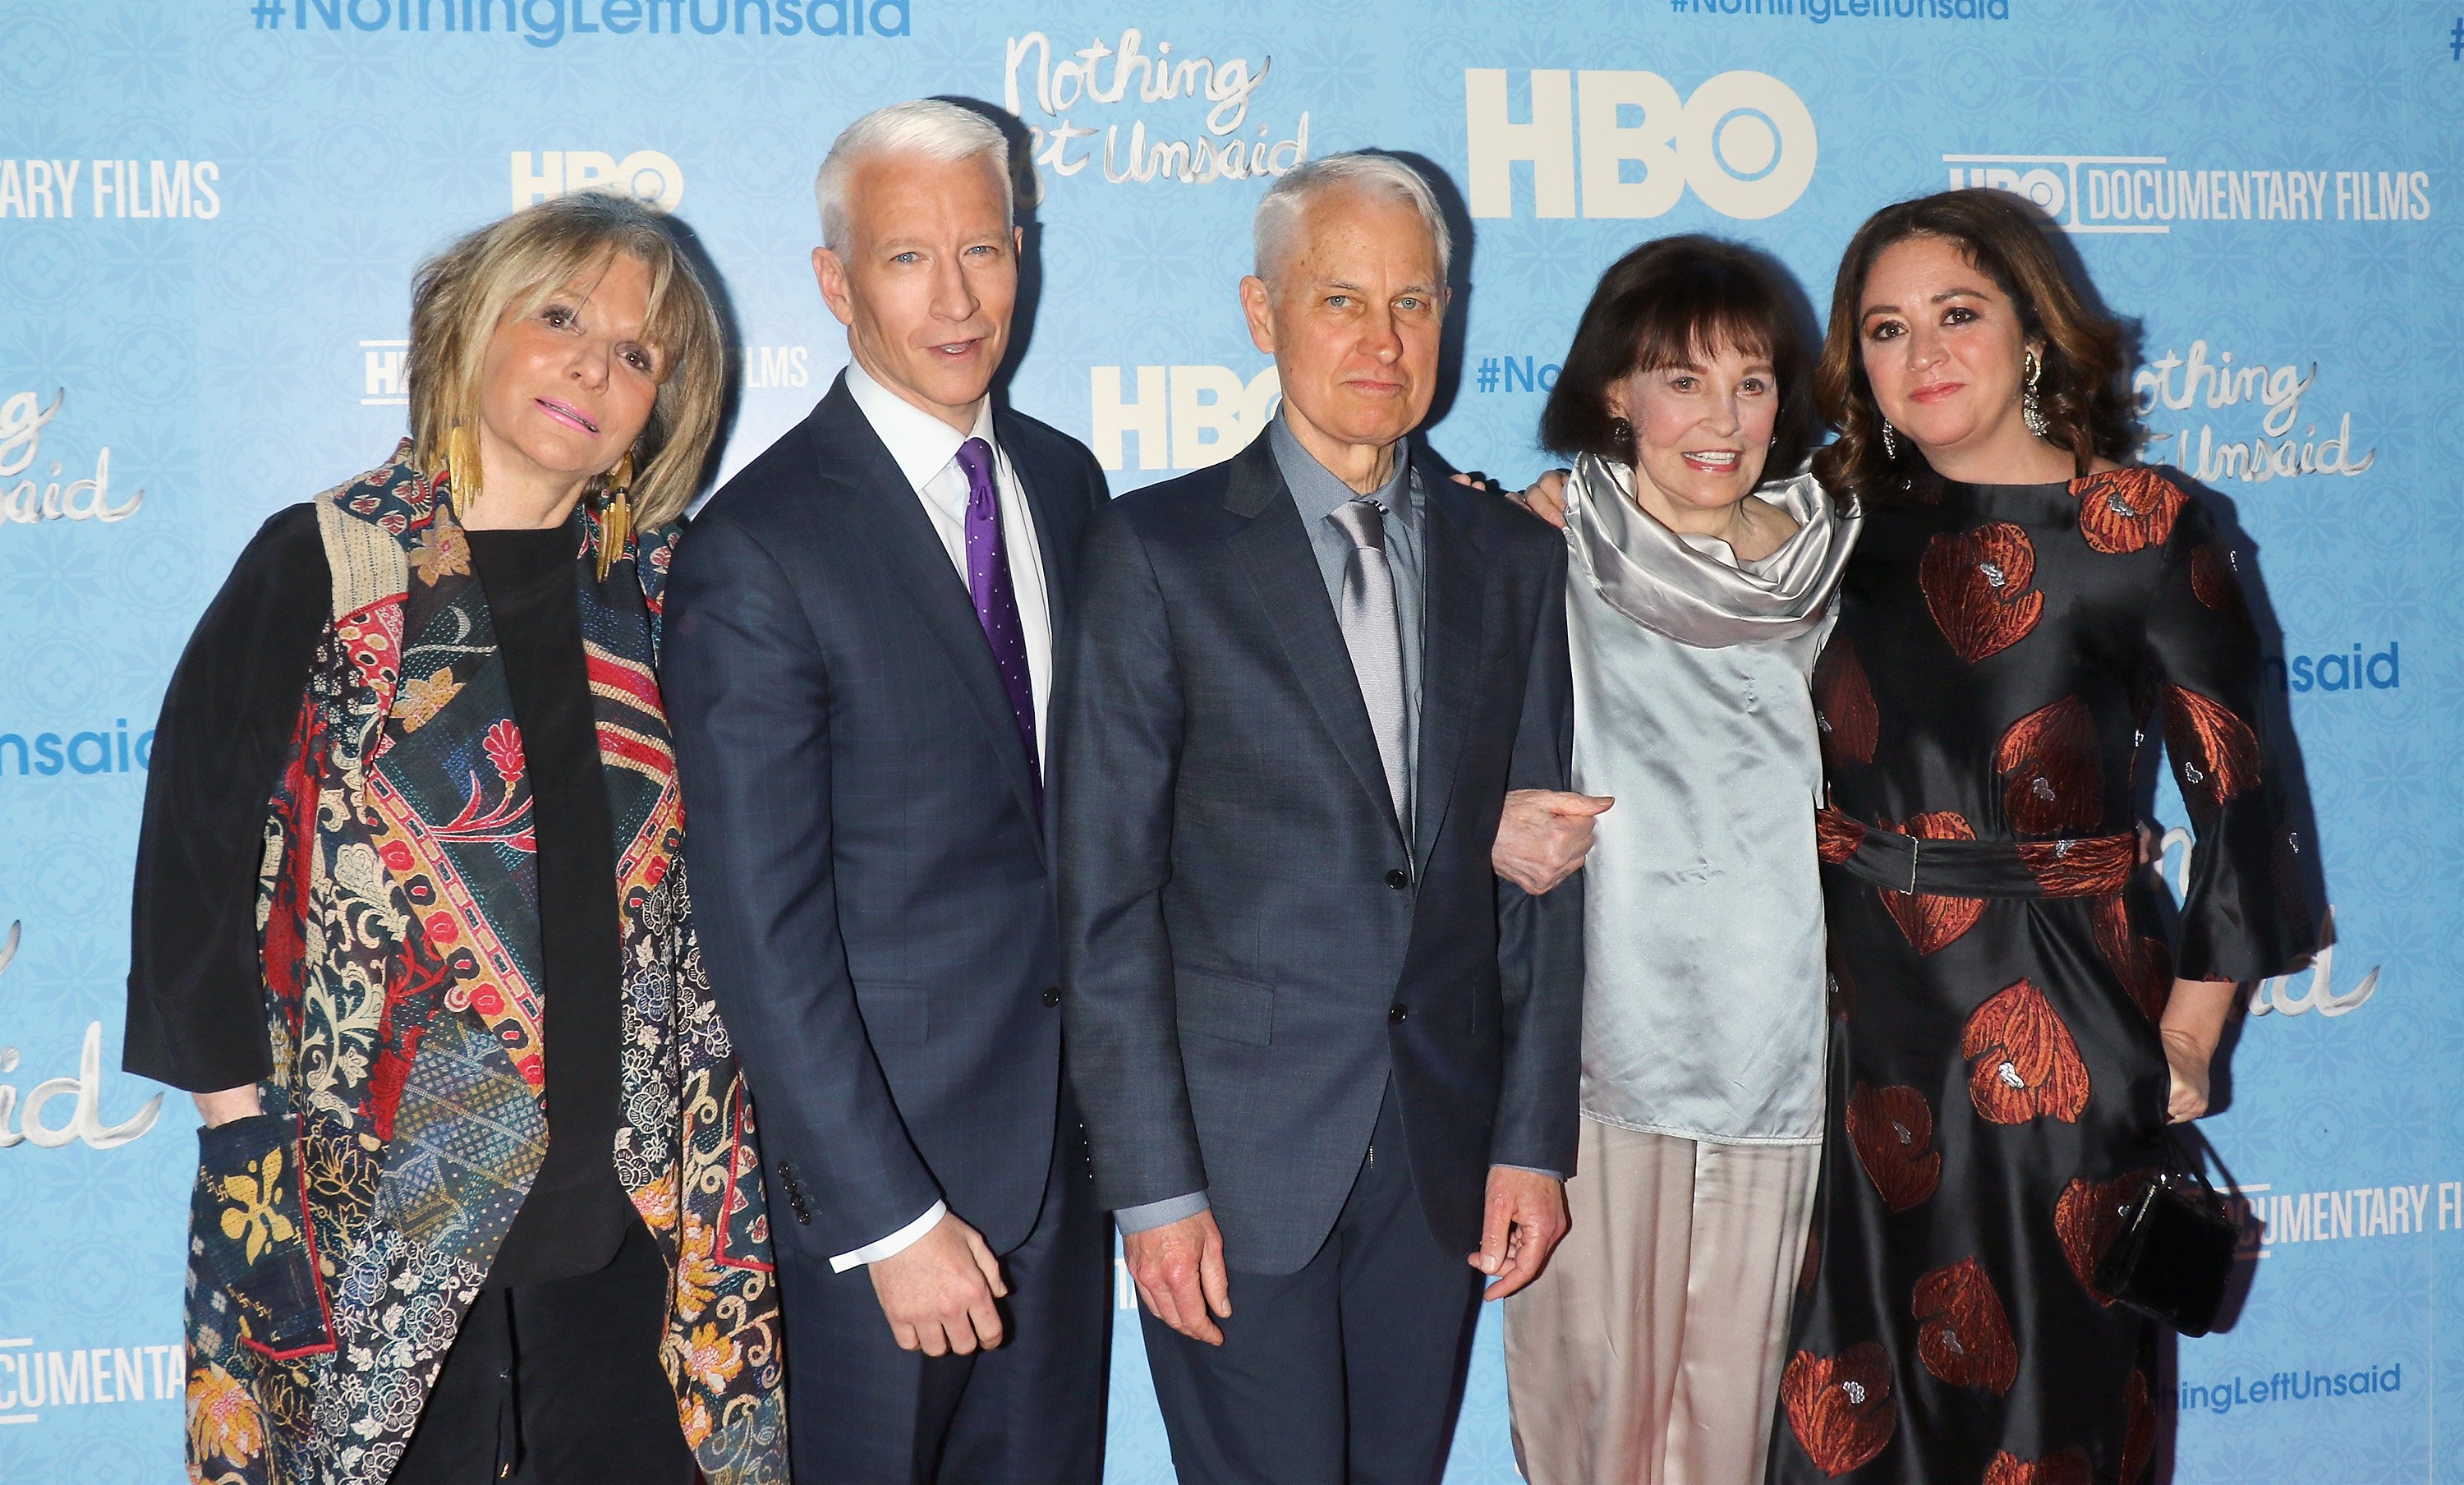 Sheila Nevins, Anderson Cooper, Stan Stokowski, Gloria Vanderbilt and Liz Garbus during the "Nothing Left Unsaid" New York premiere at Time Warner Center on April 4, 2016, in New York City. | Source: Getty Images